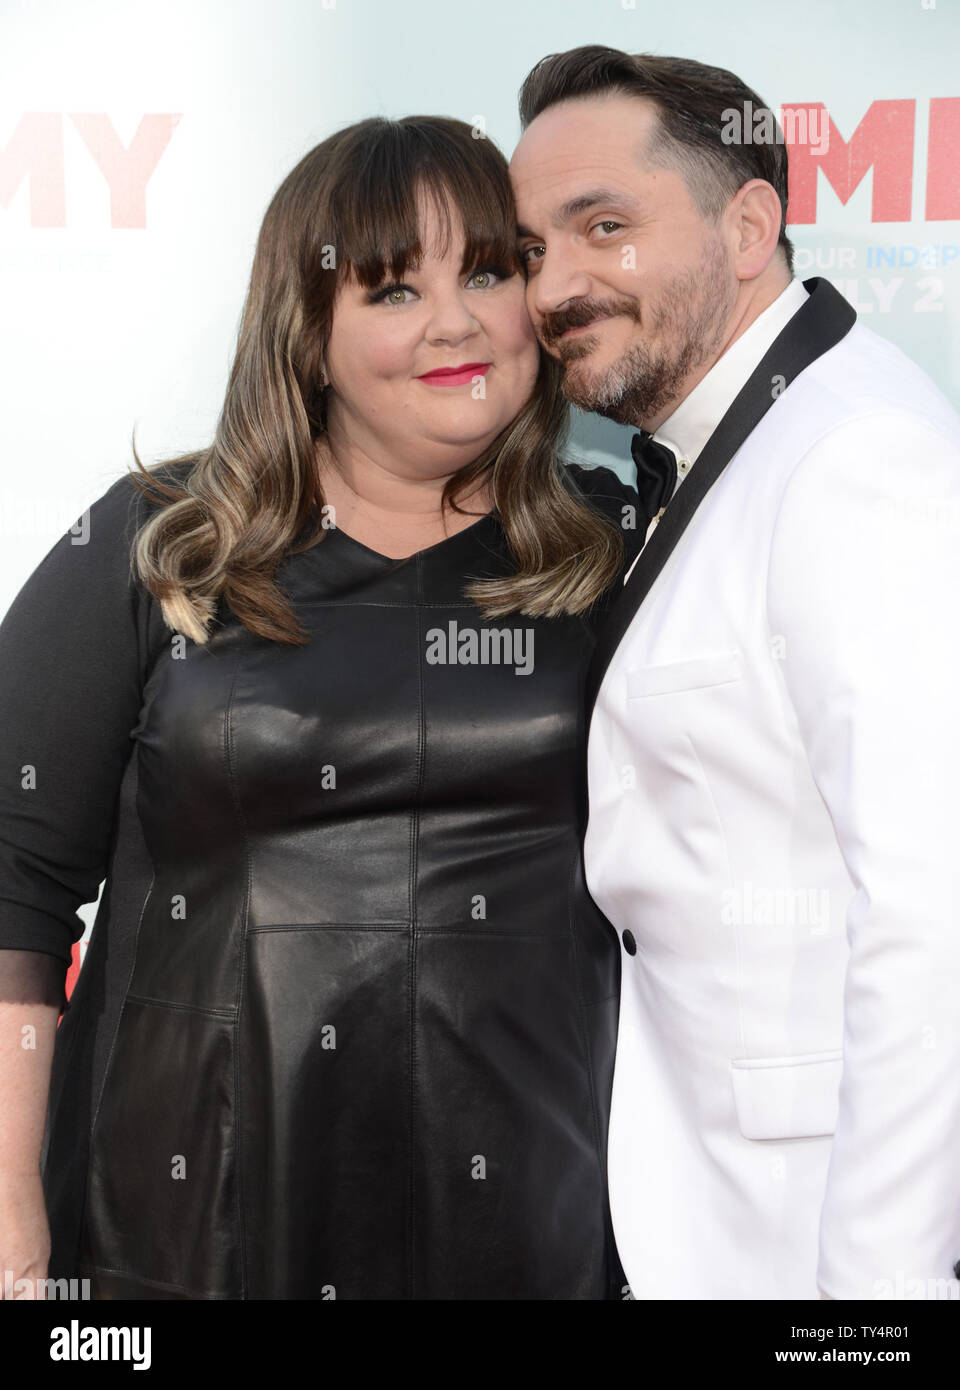 Director Ben Falcone (R) and cast member Melissa McCarthy (L) attend the premiere of 'Tammy' in Los Angeles  on June 30, 2014.      UPI/Phil McCarten Stock Photo